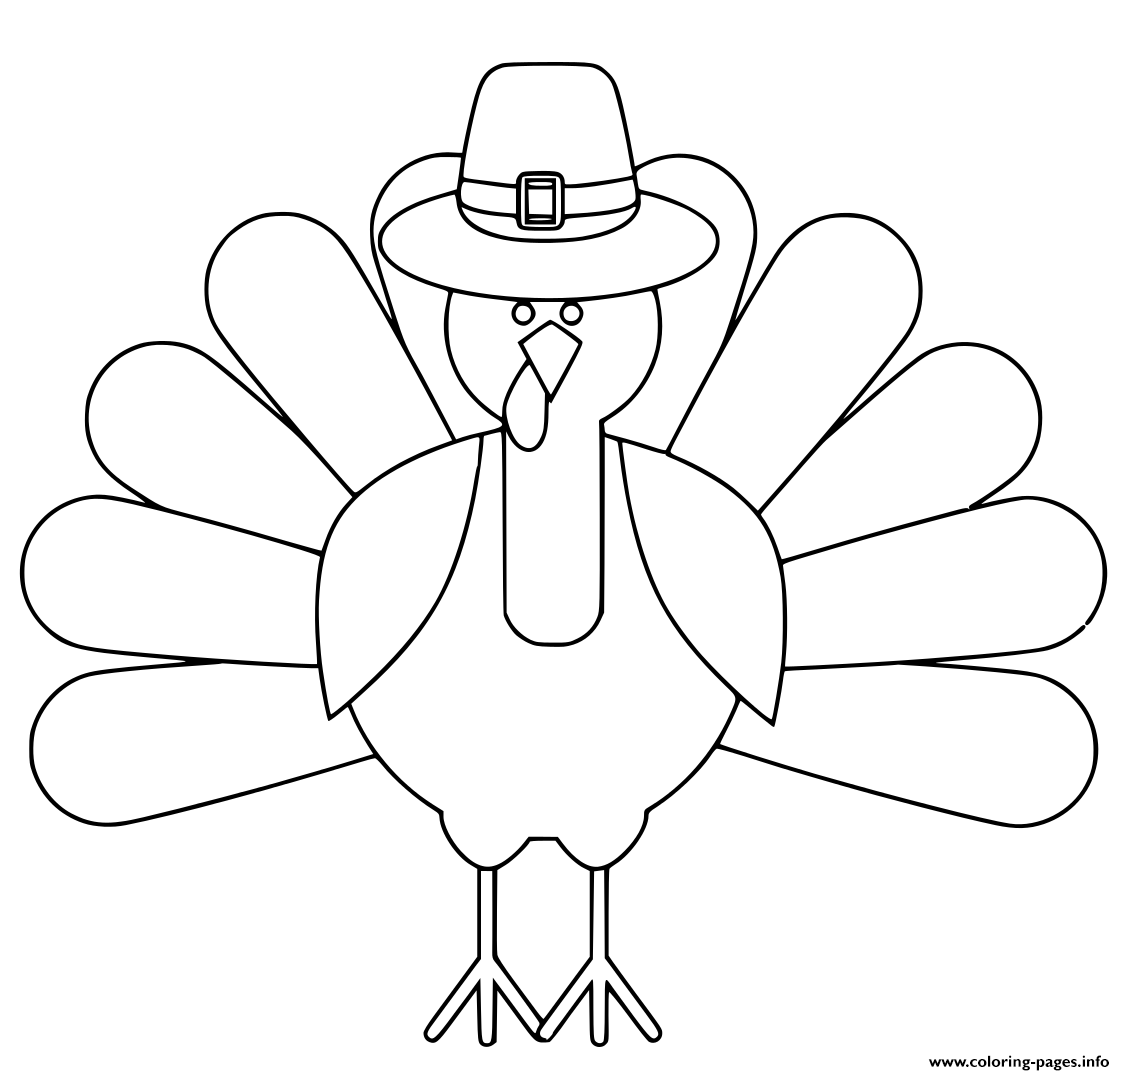 turkey-thanksgiving-day-simple-easy-coloring-page-printable